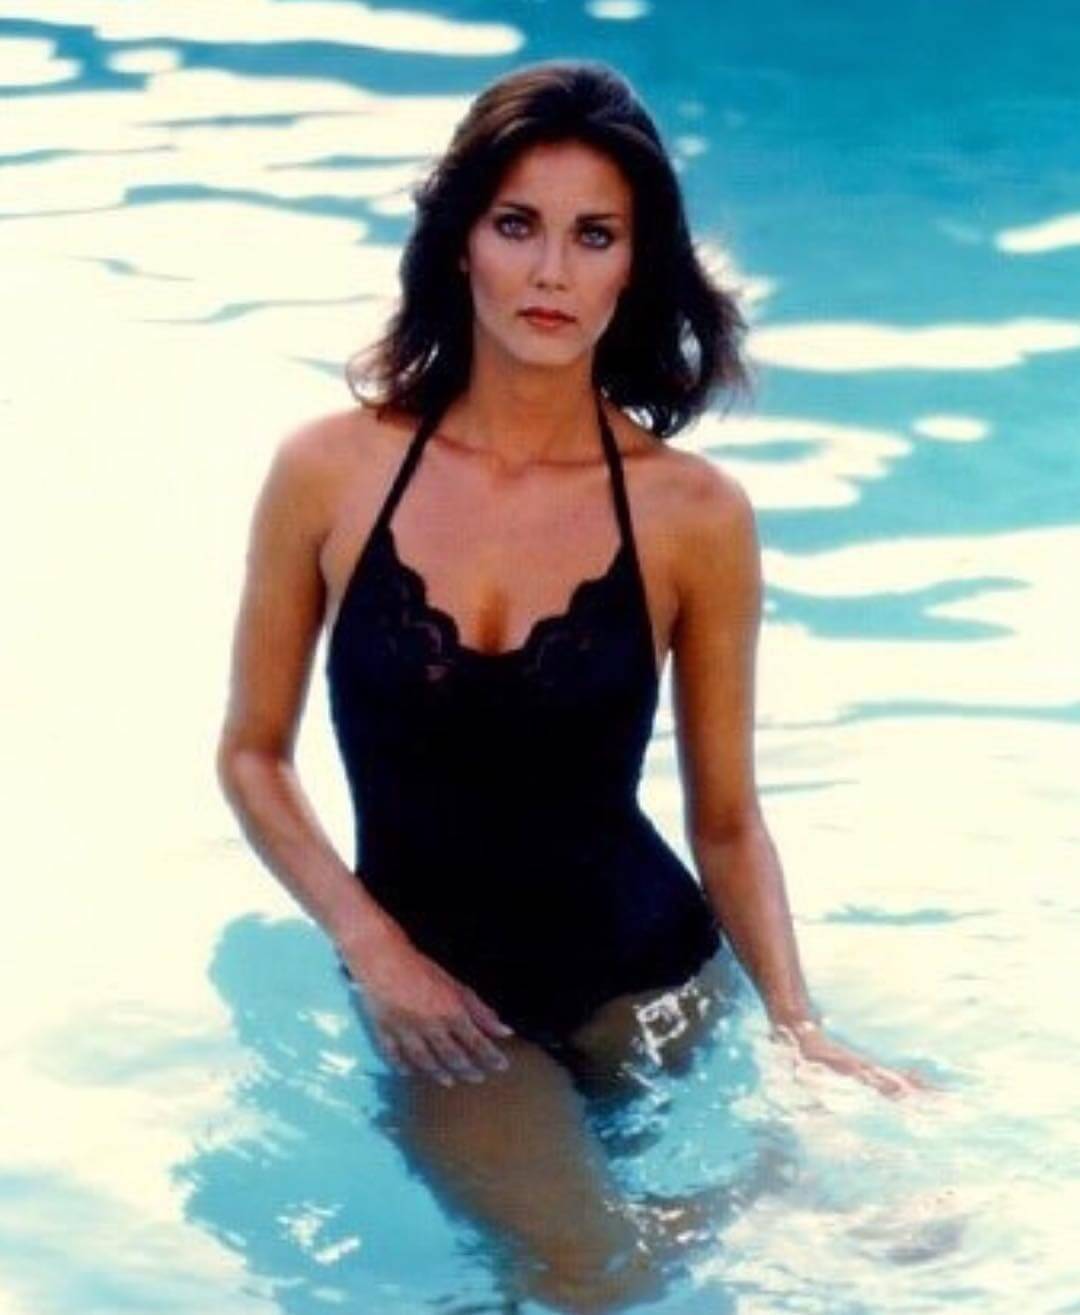 49 Hottest Lynda Carter Bikini Pictures Will Make You Want To Jump Into Bed With Her | Best Of Comic Books